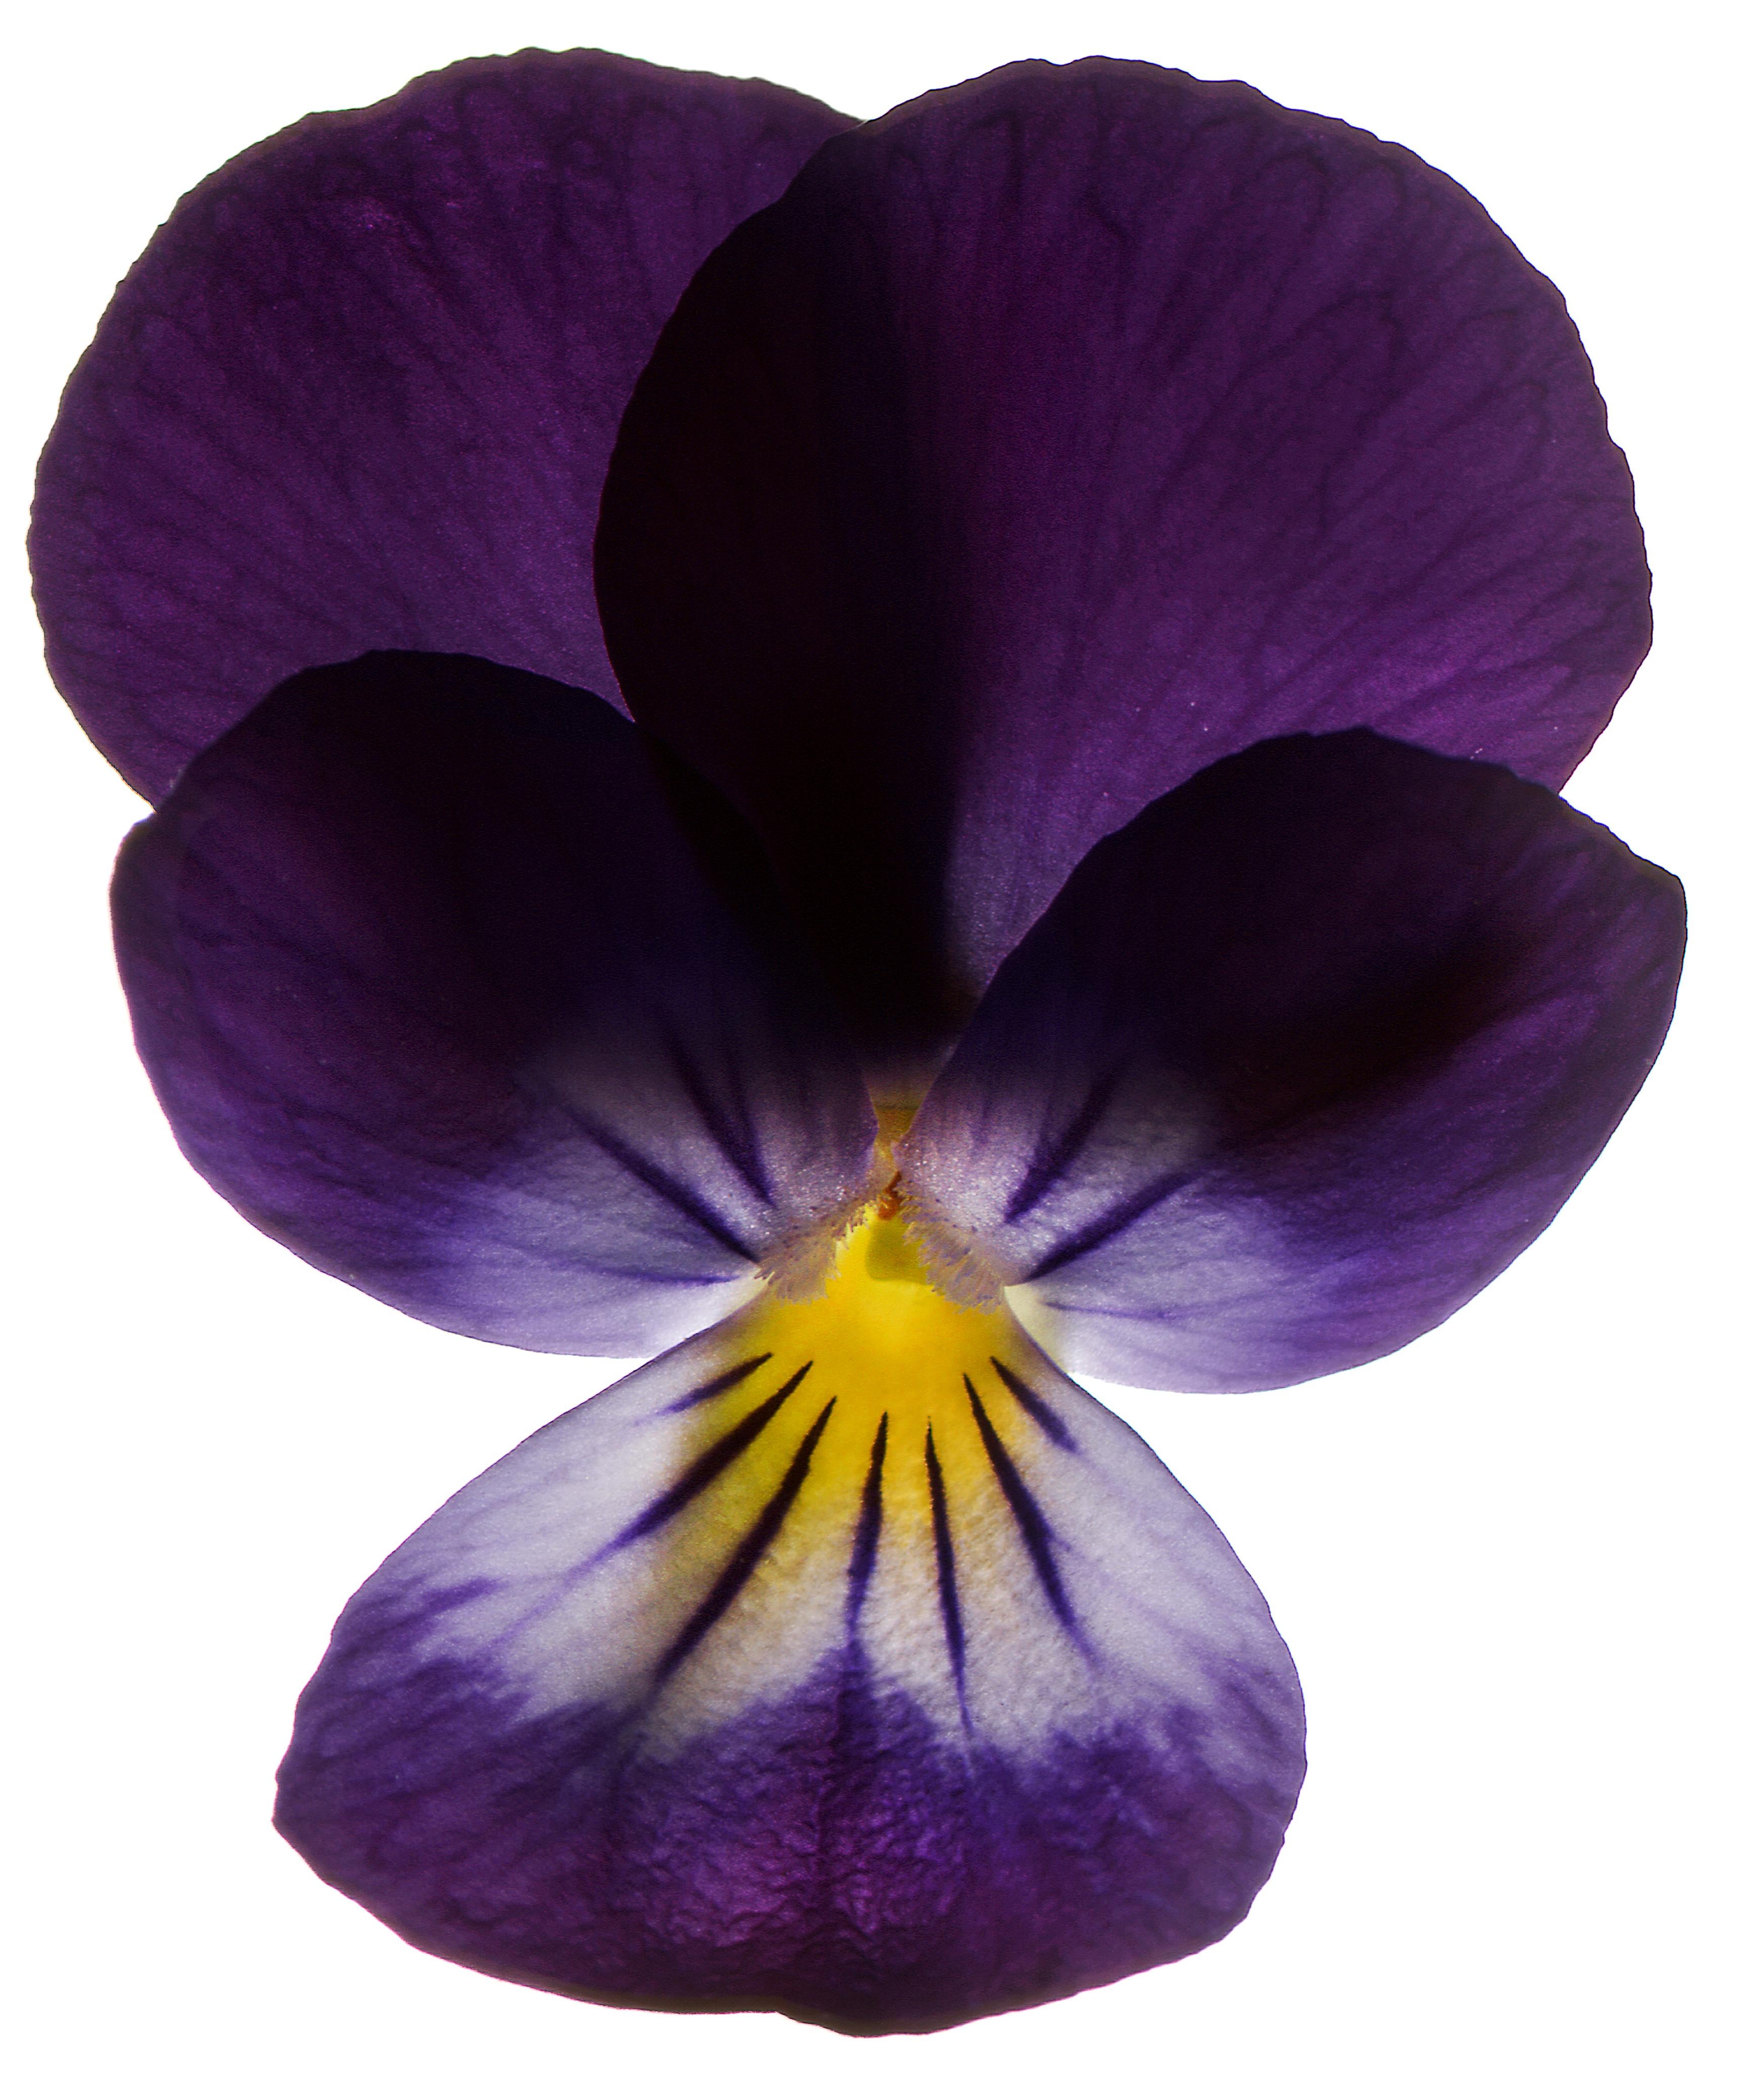 Chad Kleitsch Color Photograph - Untitled Flower # 22